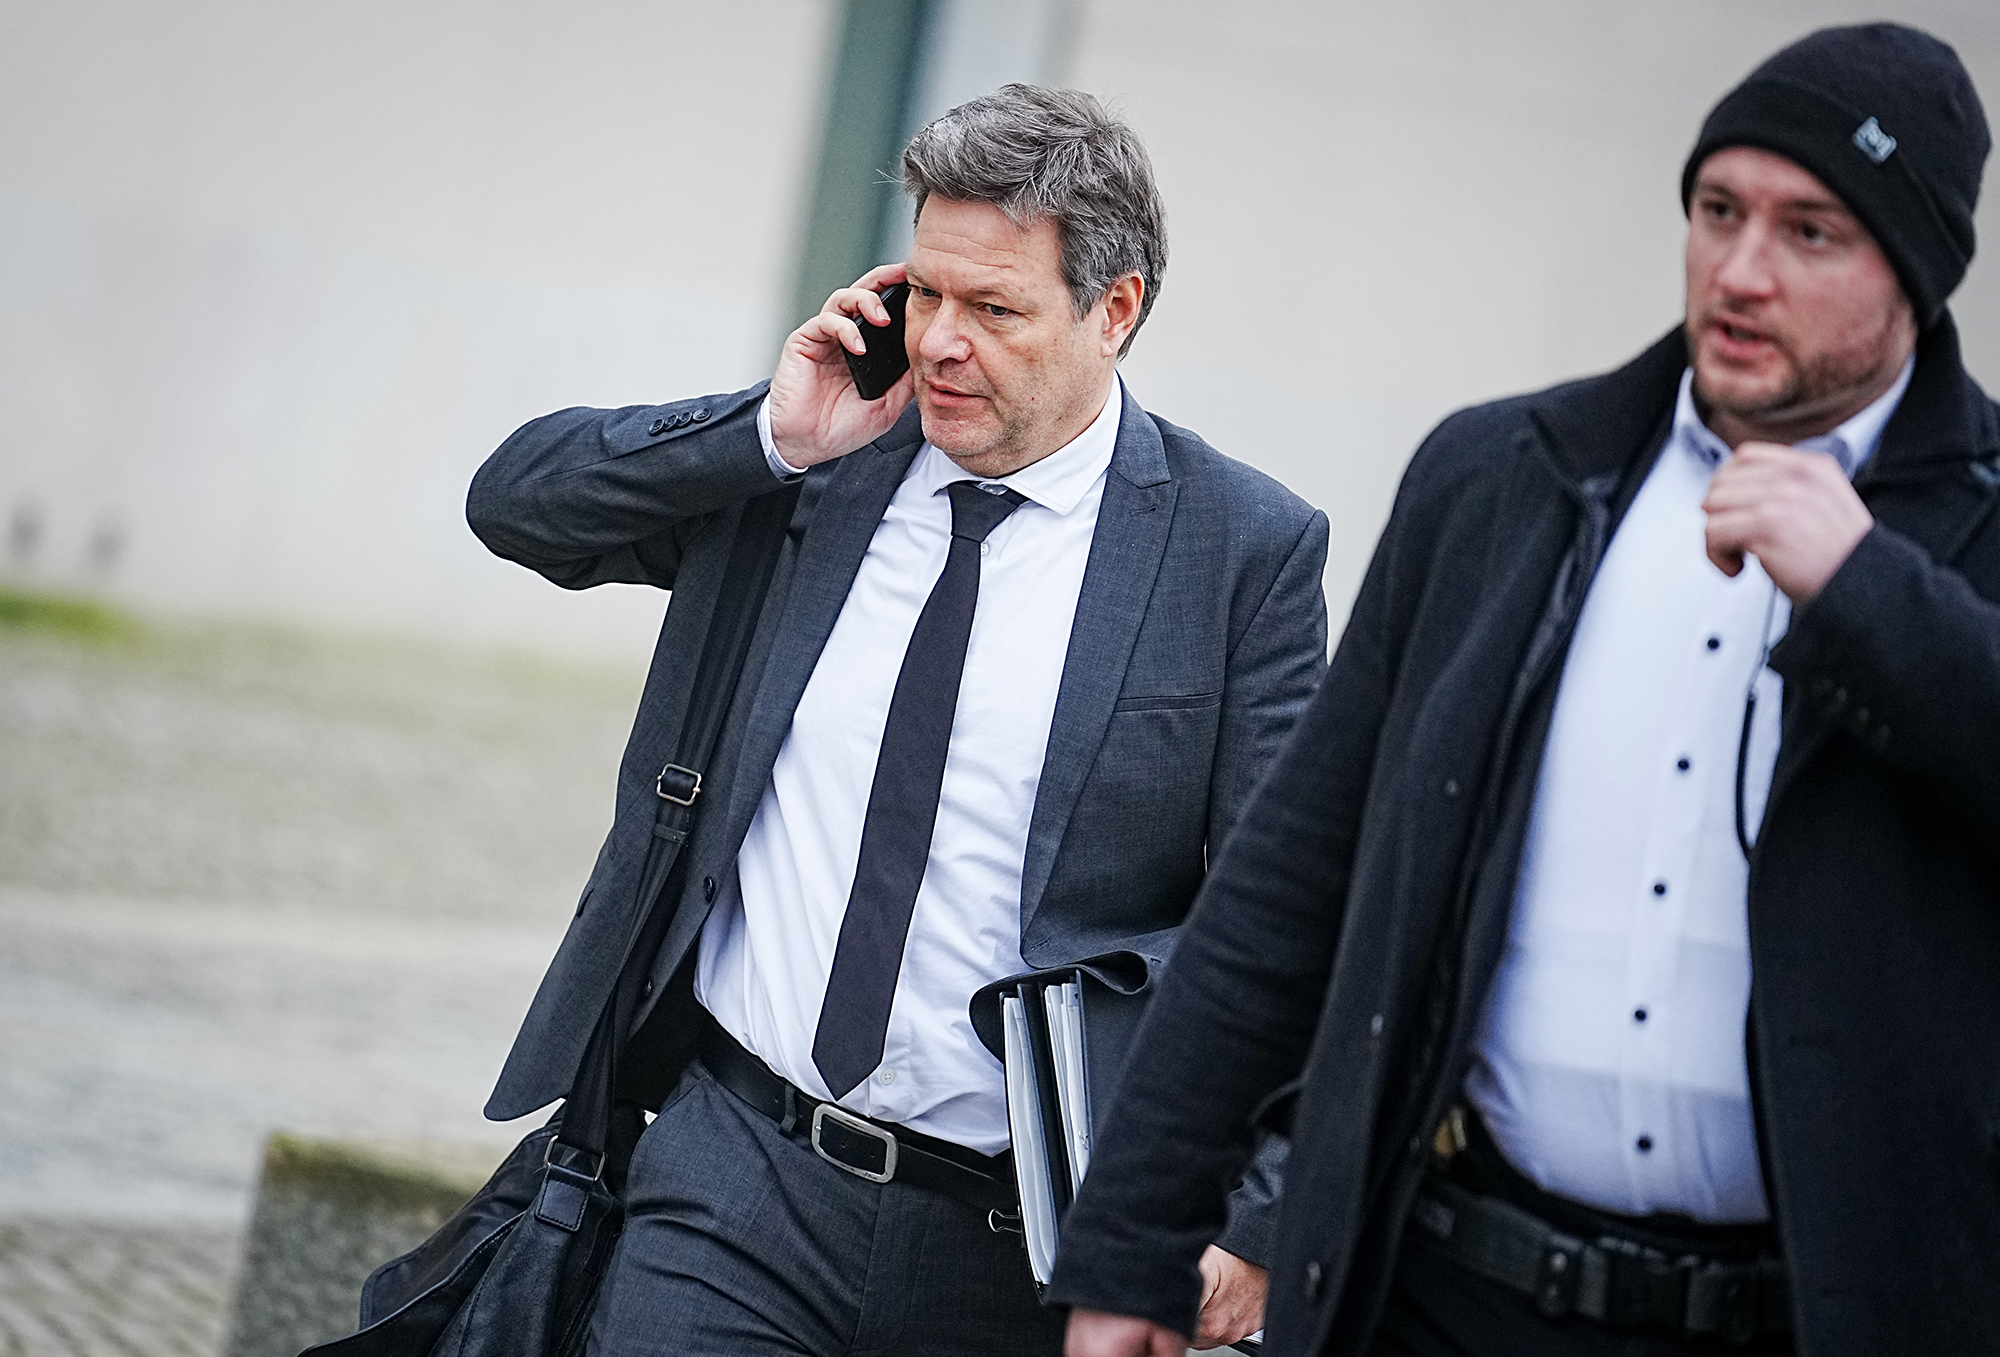 Robert Habeck, Federal Minister for the Economy and Climate Protection, comes out of the Chancellor's Office after a Federal Cabinet meeting in Berlin, Germany, on January 25.